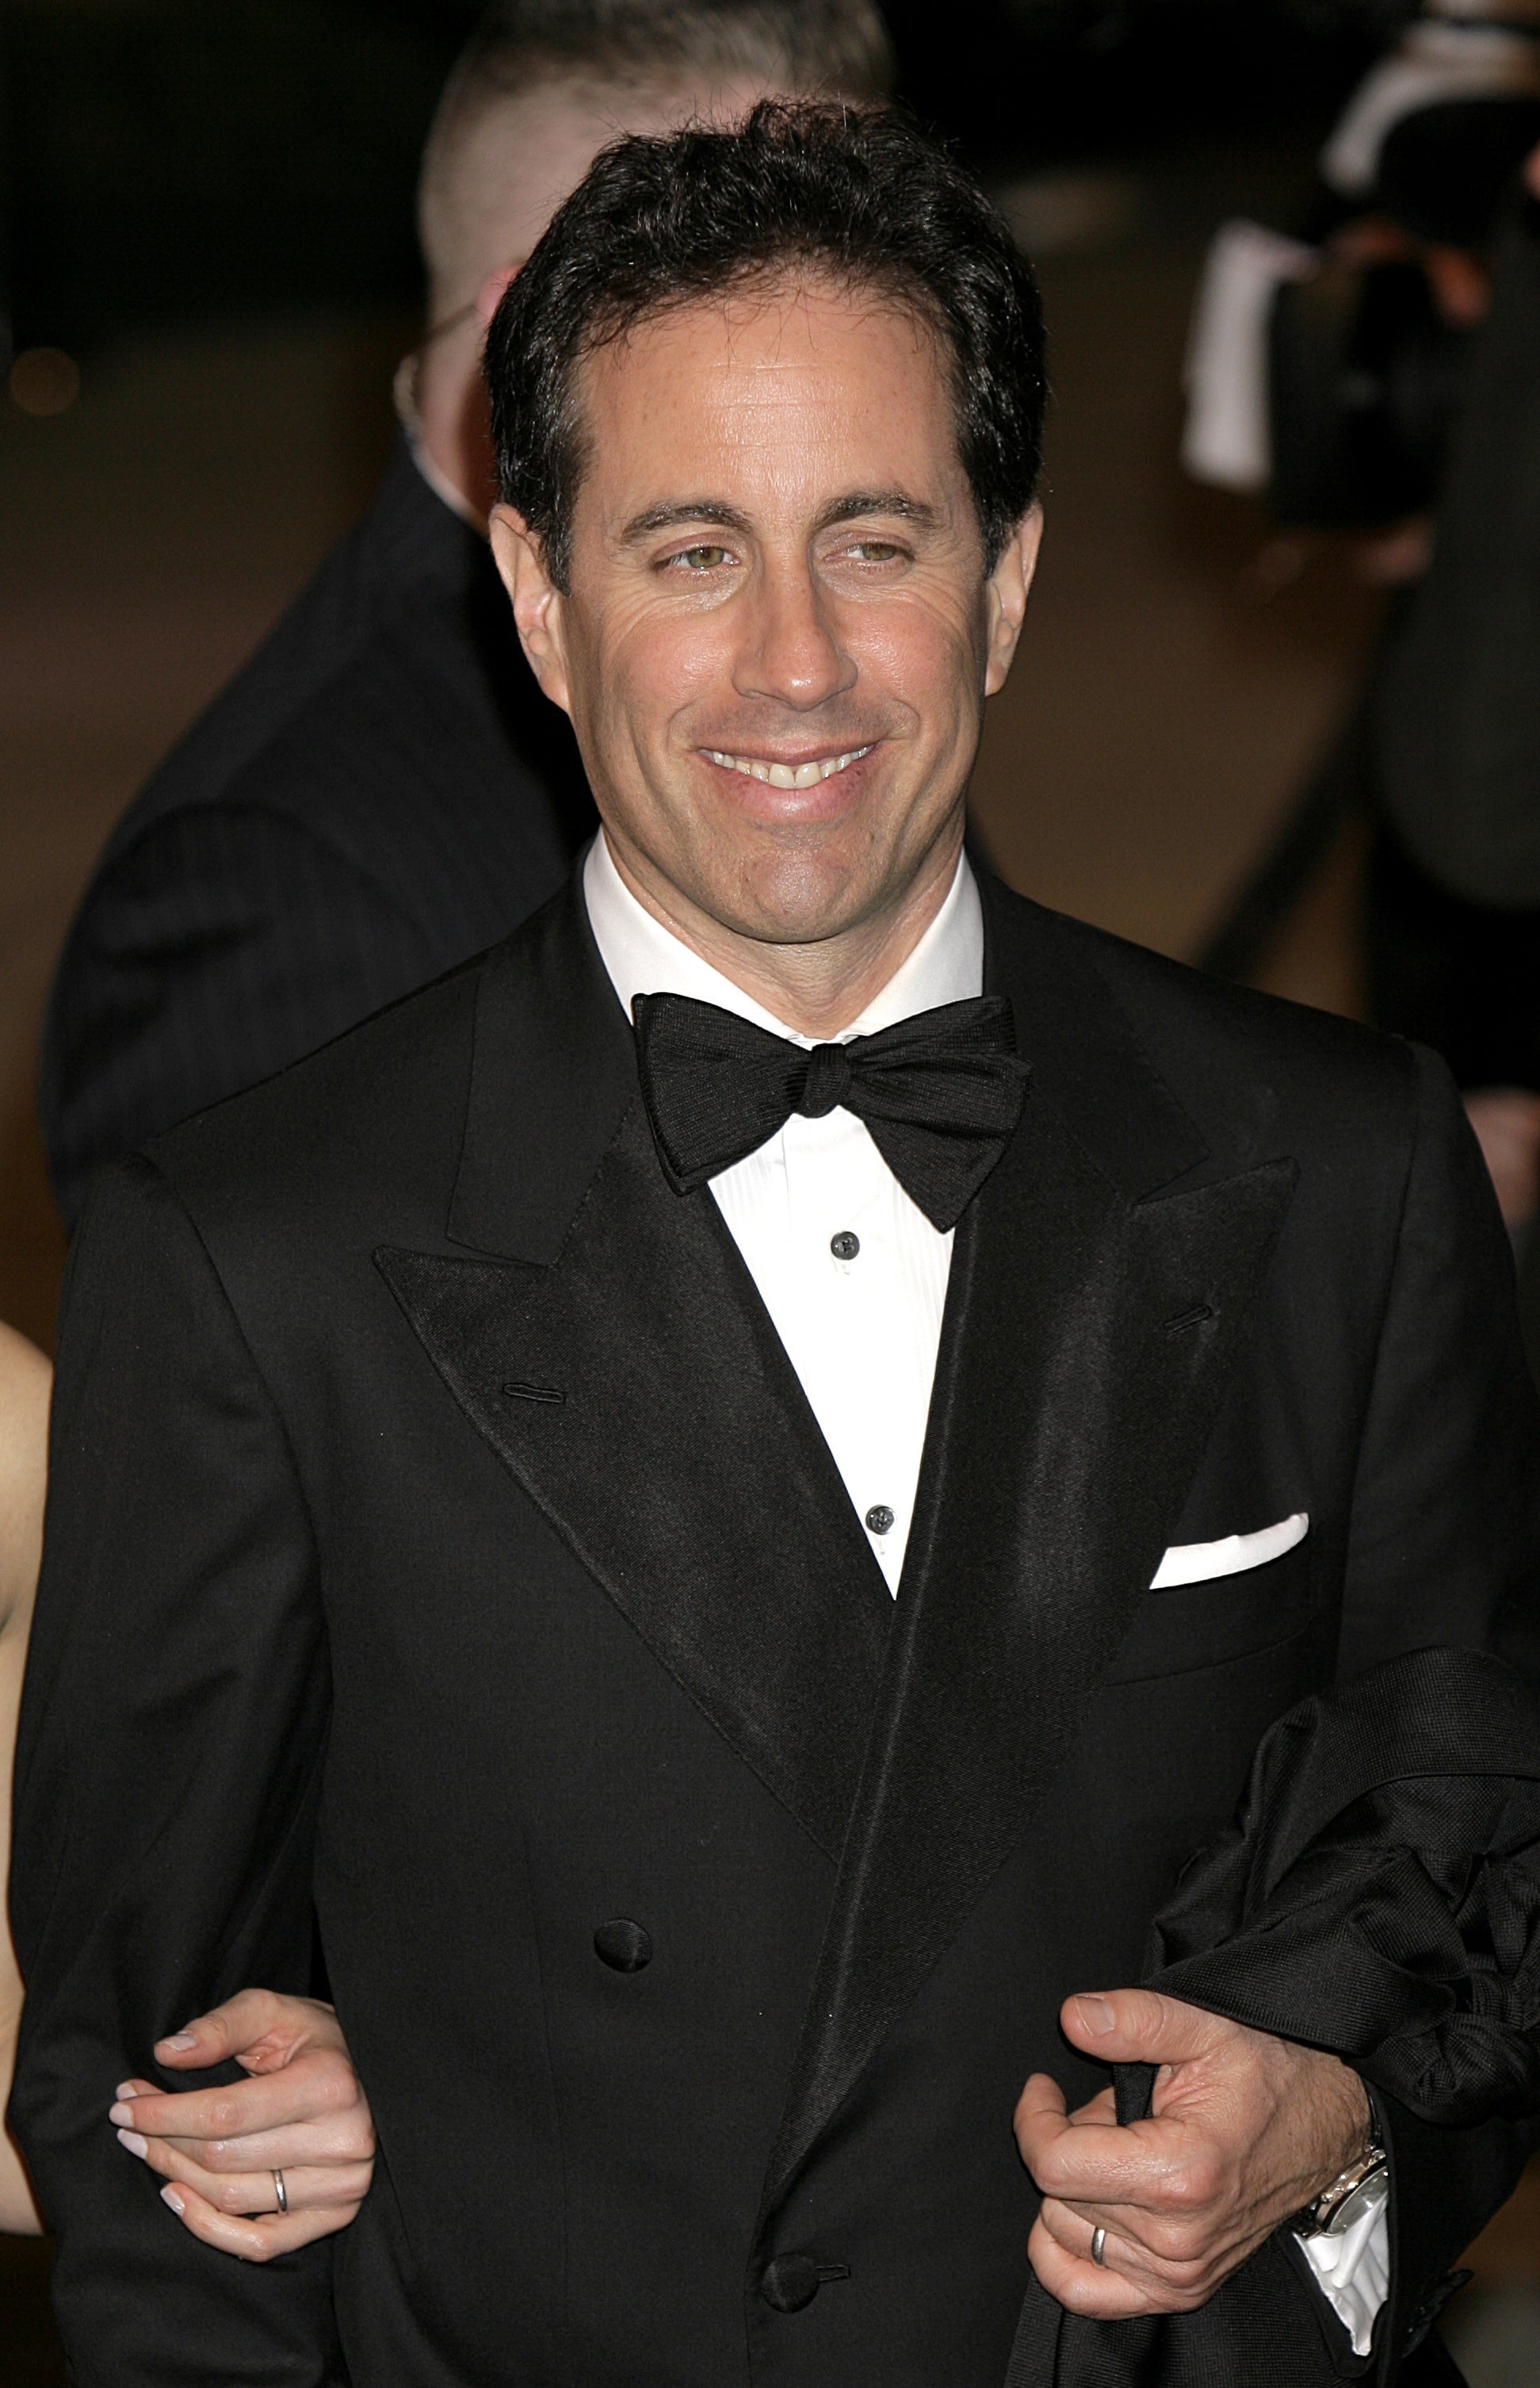 Jerry Seinfeld pays tribute to the ‘TV mom’ Liz Sheridan following her death (Yui Mok/PA)